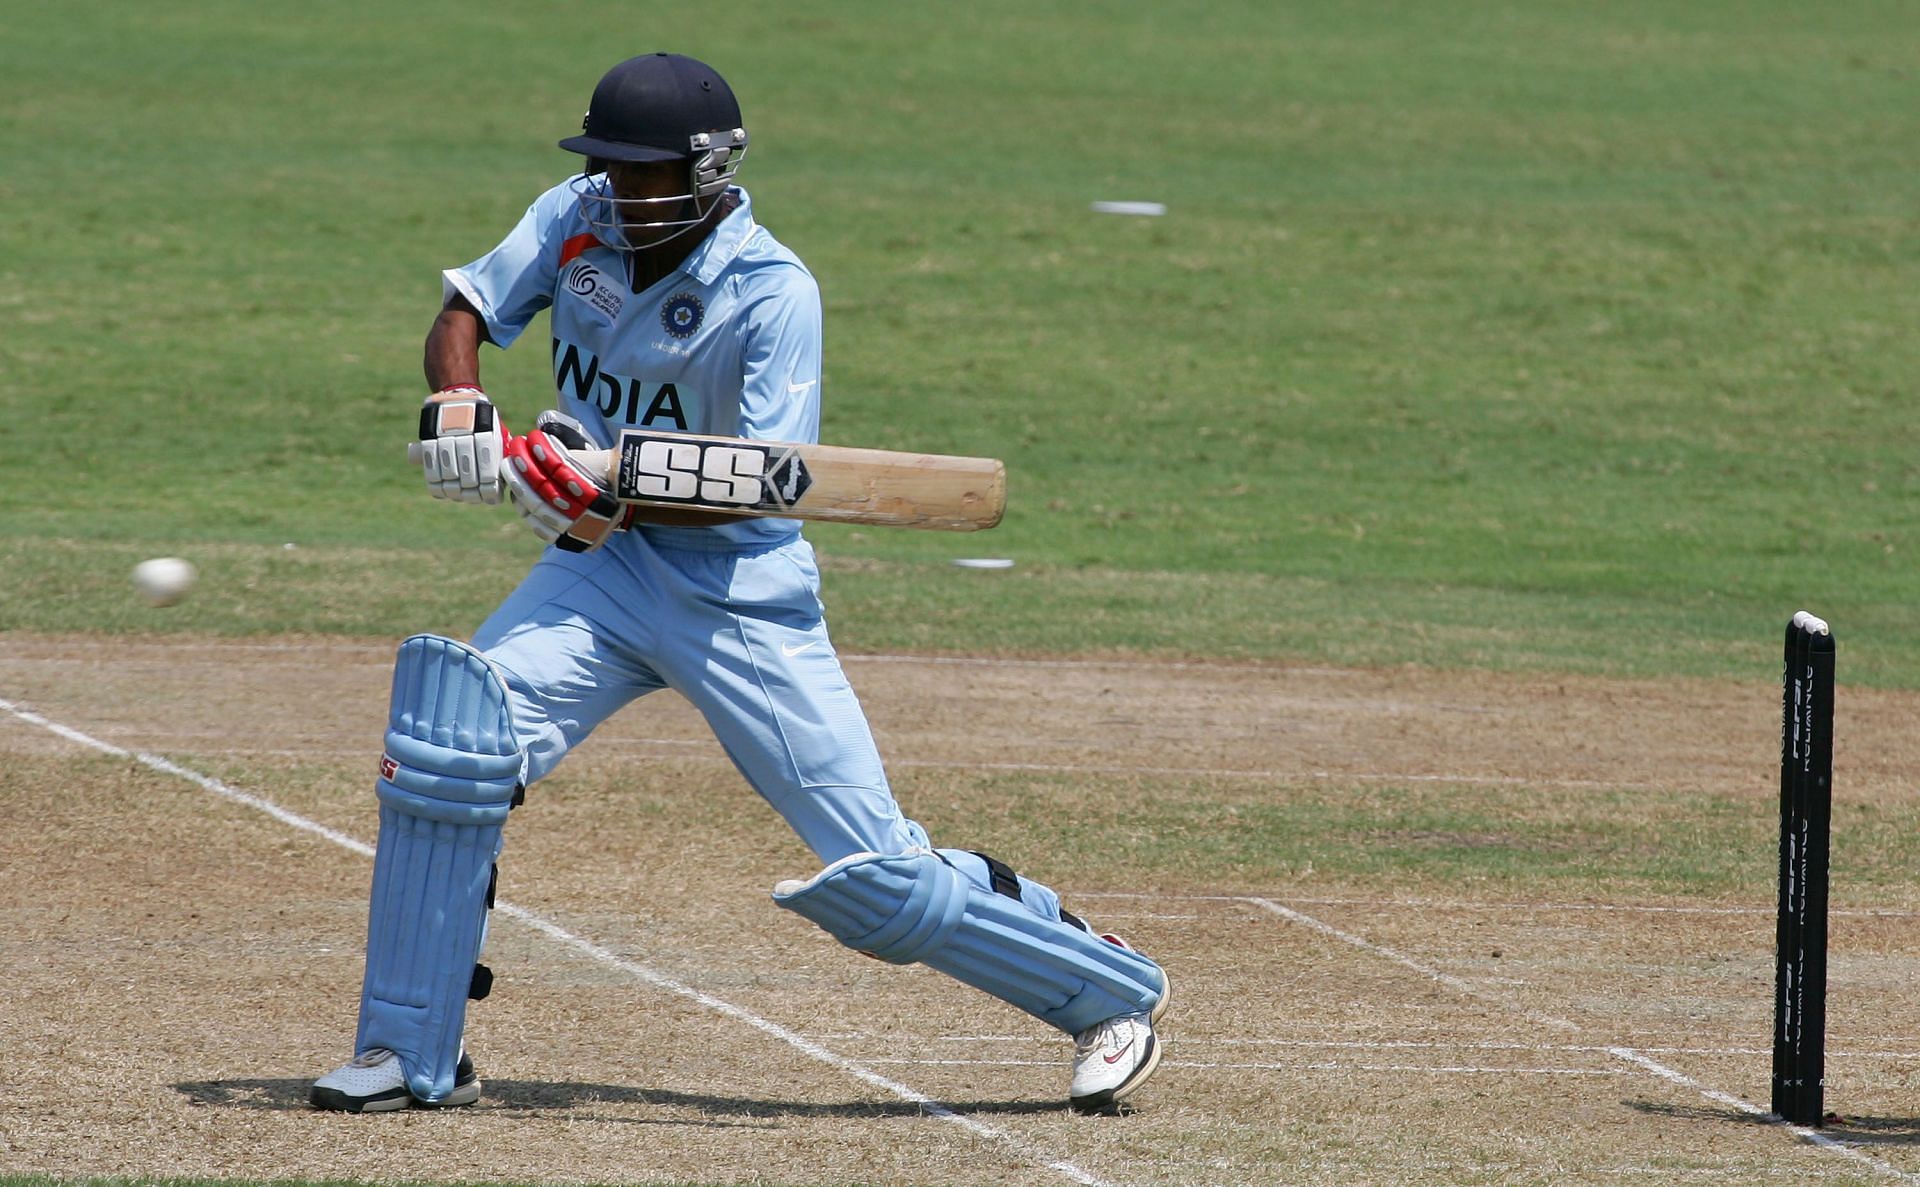 Tanmay Srivastava played for India in ICC U-19 World Cup 2008. (Image: Getty)